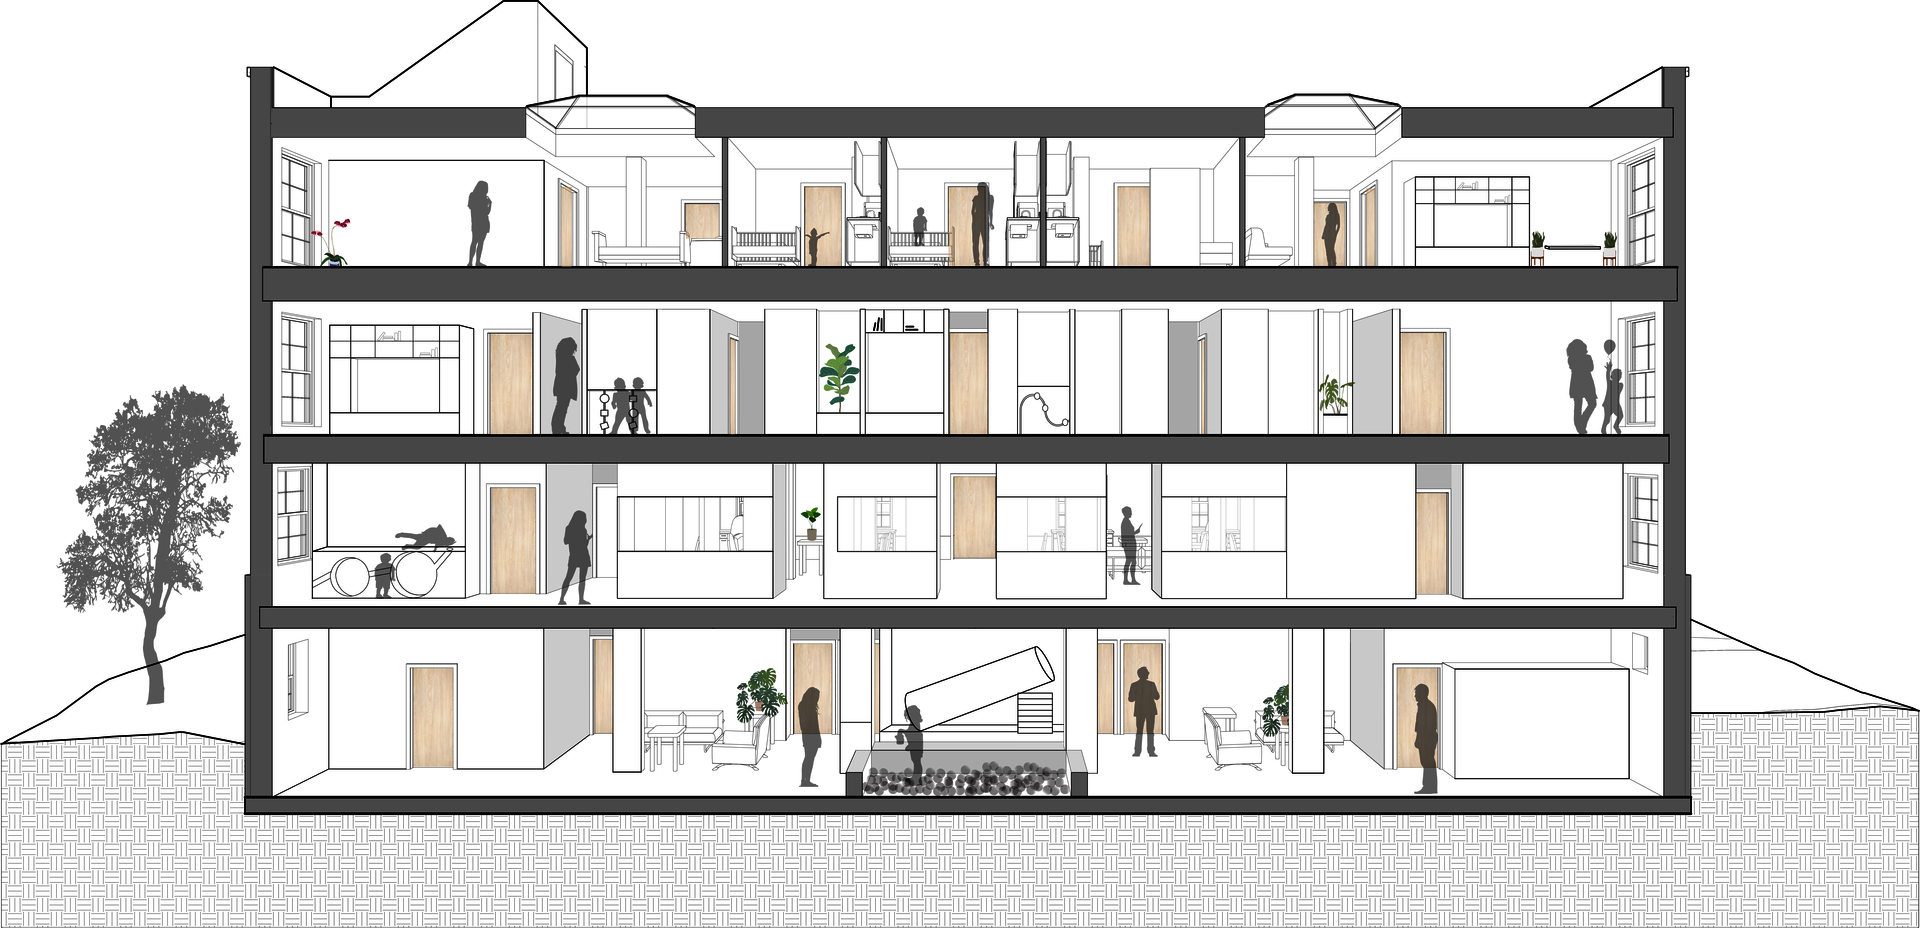 Section through access points on all floors highlighting the interactive quality of the In-habitable walls 